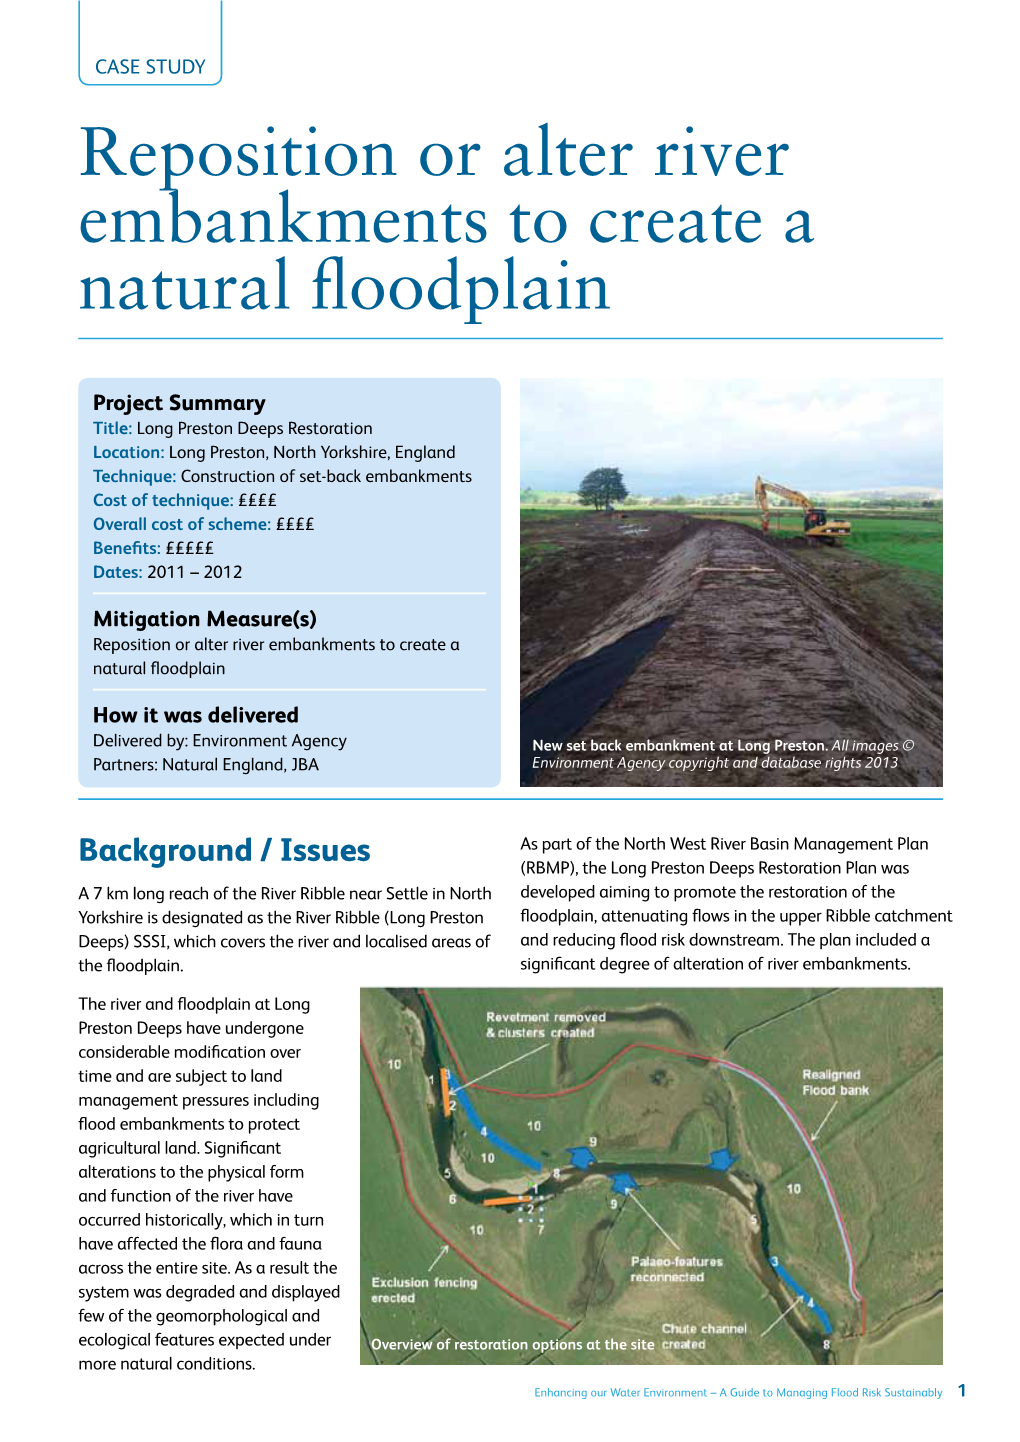 Reposition Or Alter River Embankments to Create a Natural Floodplain